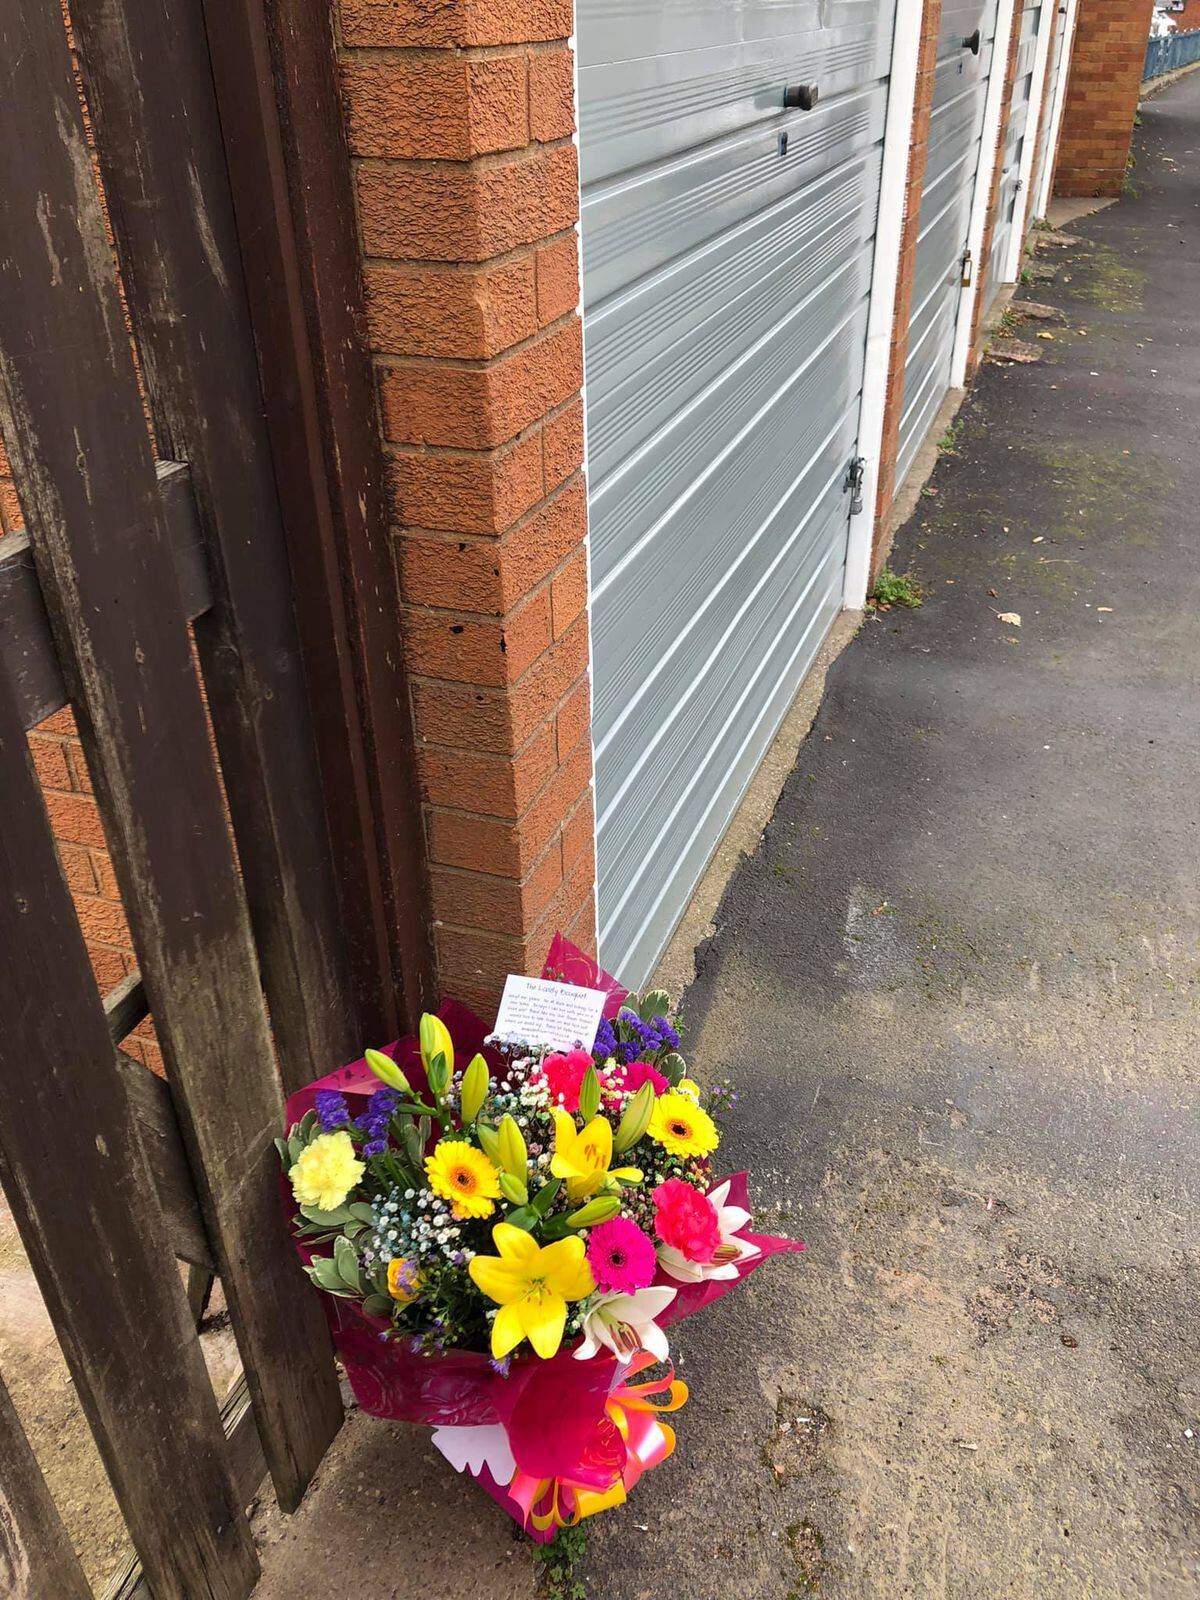 Flowers that Amanda Meese has left to put a smile on someone's face